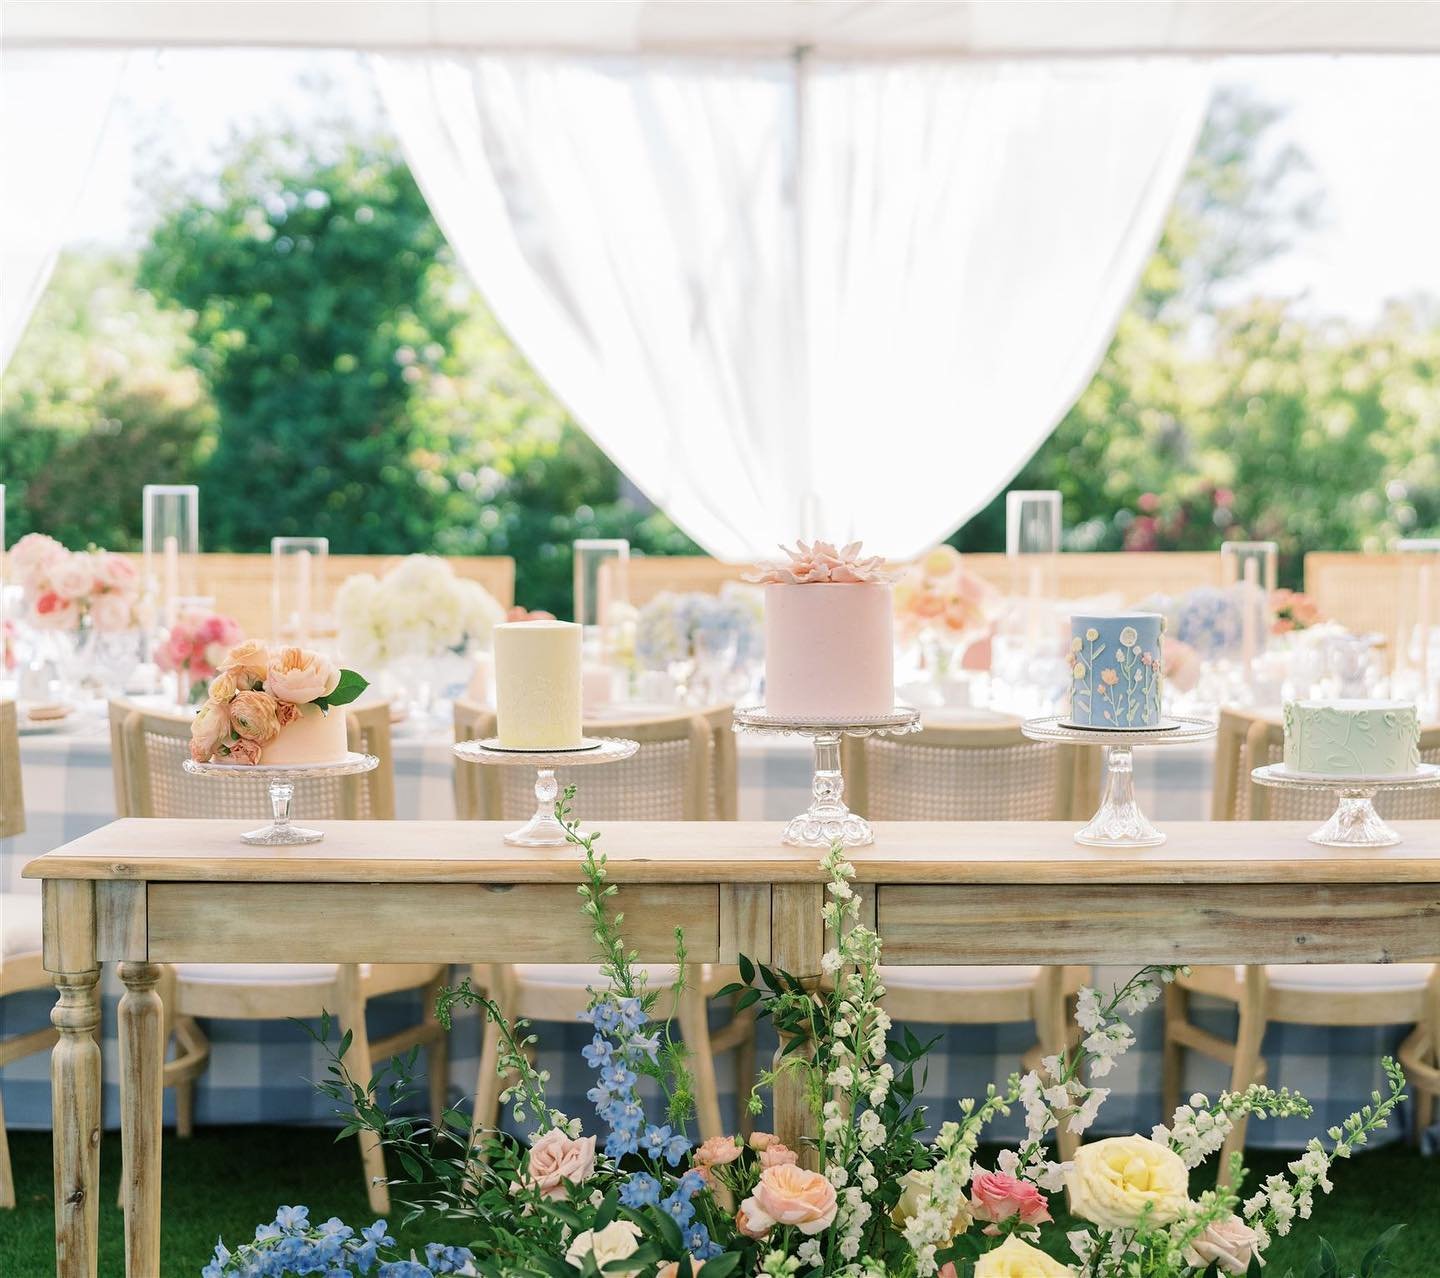 A moment for this dreamy cake table😍featuring our Meyer Console table! 
&bull;
Planner: @shineeventsaz
Venue: @paradisevalleycountryclub
Cake: @abakeshop
Floral: @clementinedesignaz
Photo: @melissaivyphotography
Video: @brettemorganfilms
Linens: @bb